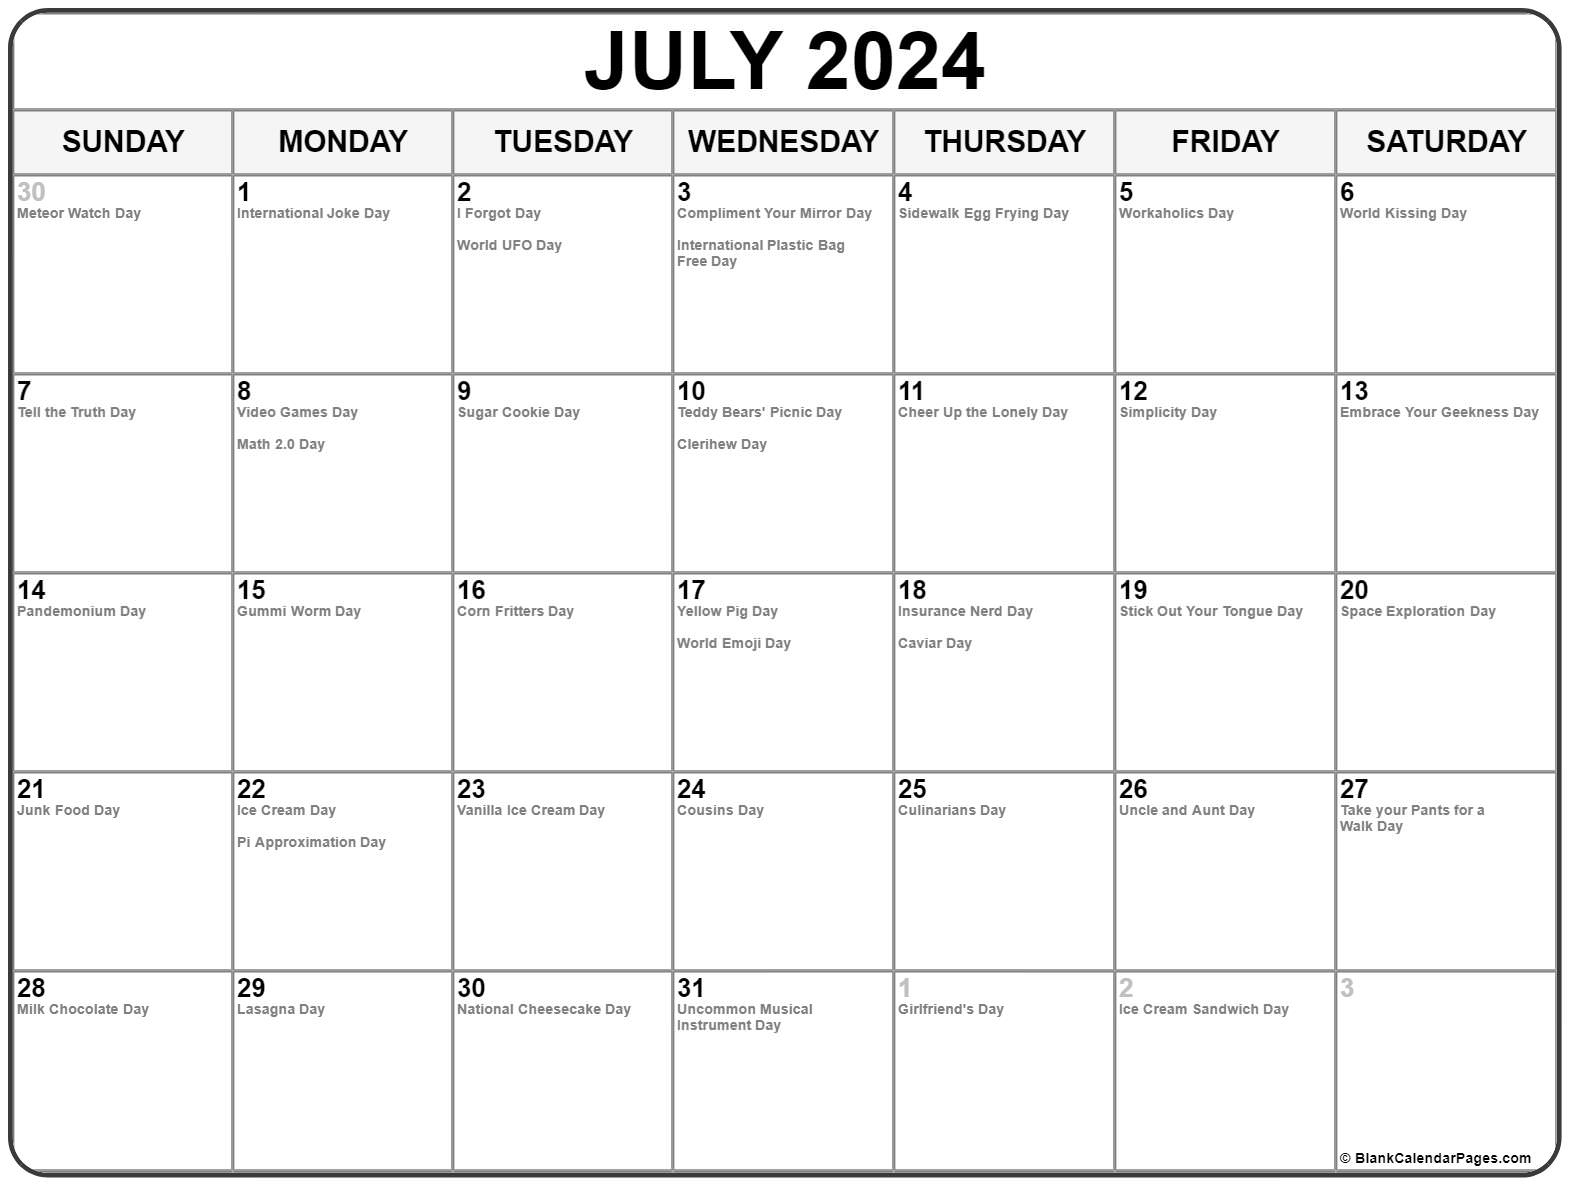 July 2024 With Holidays Calendar | National Calendar For July 2024